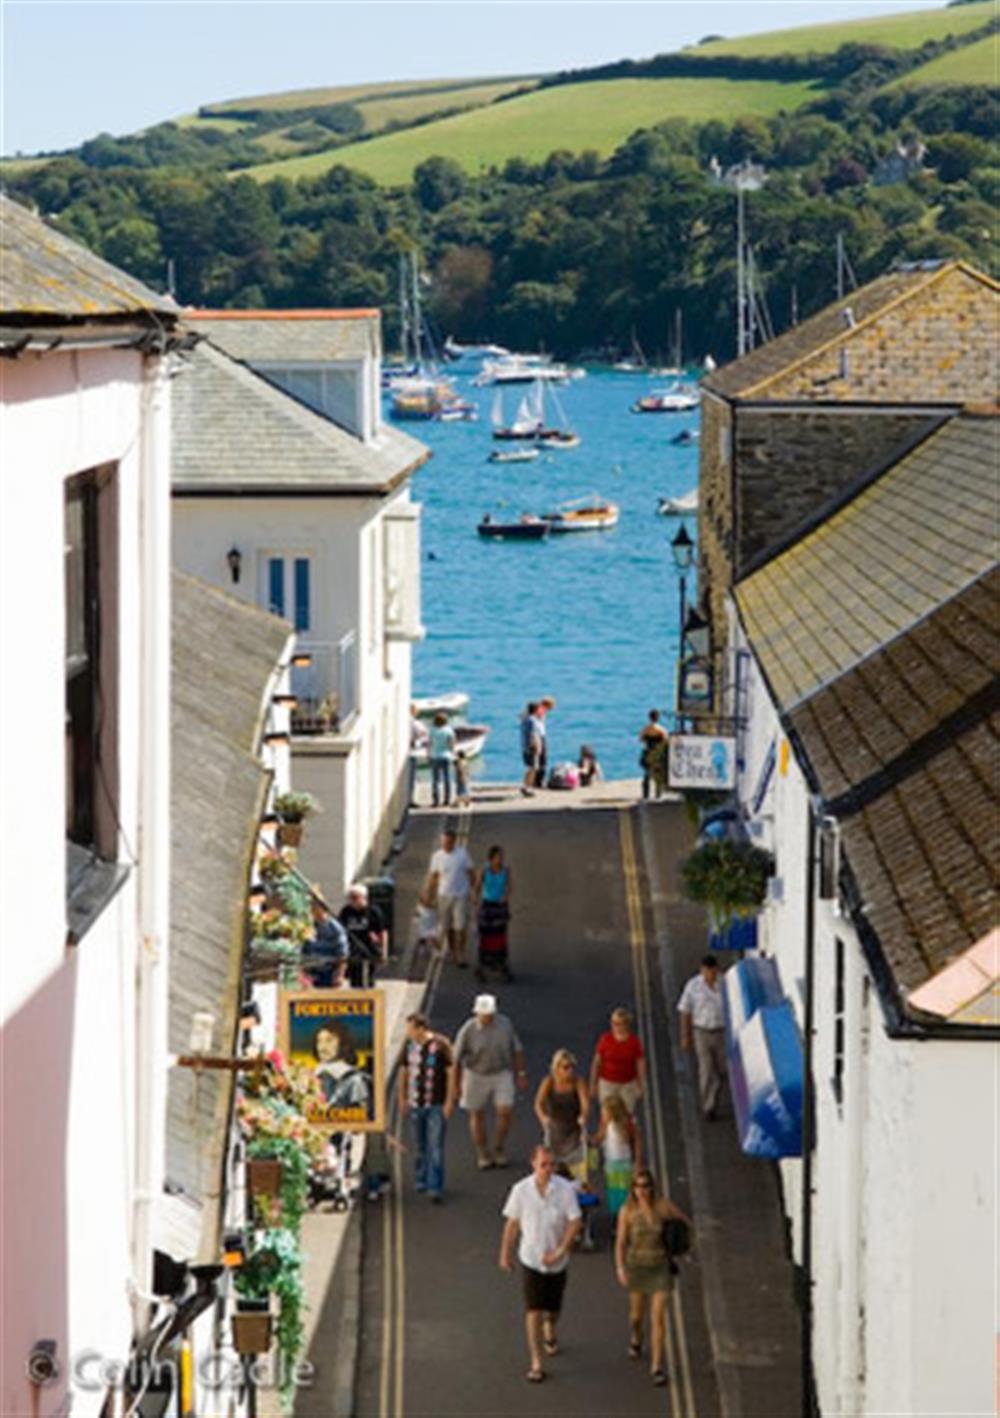 The vibrant seaside town of Salcombe easily accessed via the passenger ferry from East Portlemouth.